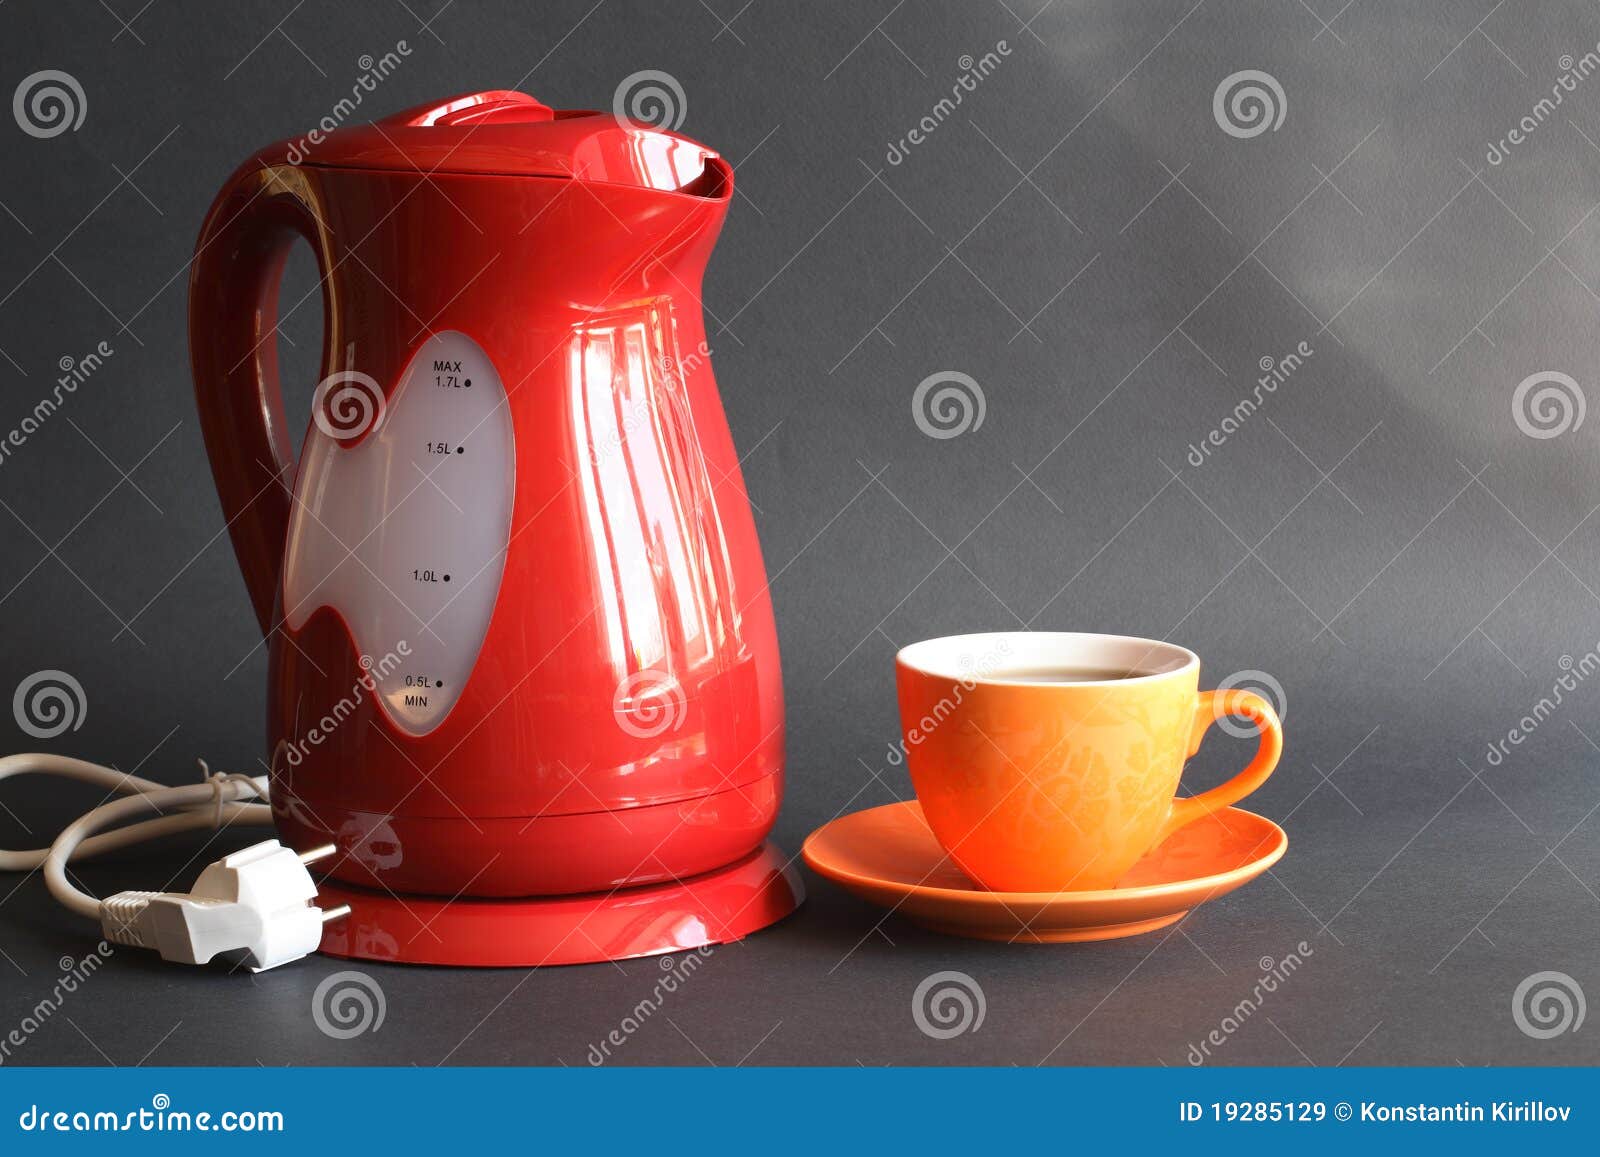 Realistic Electric Kettles Set Modern Teapots For Boiling Water For Tea Or  Coffee Stock Illustration - Download Image Now - iStock